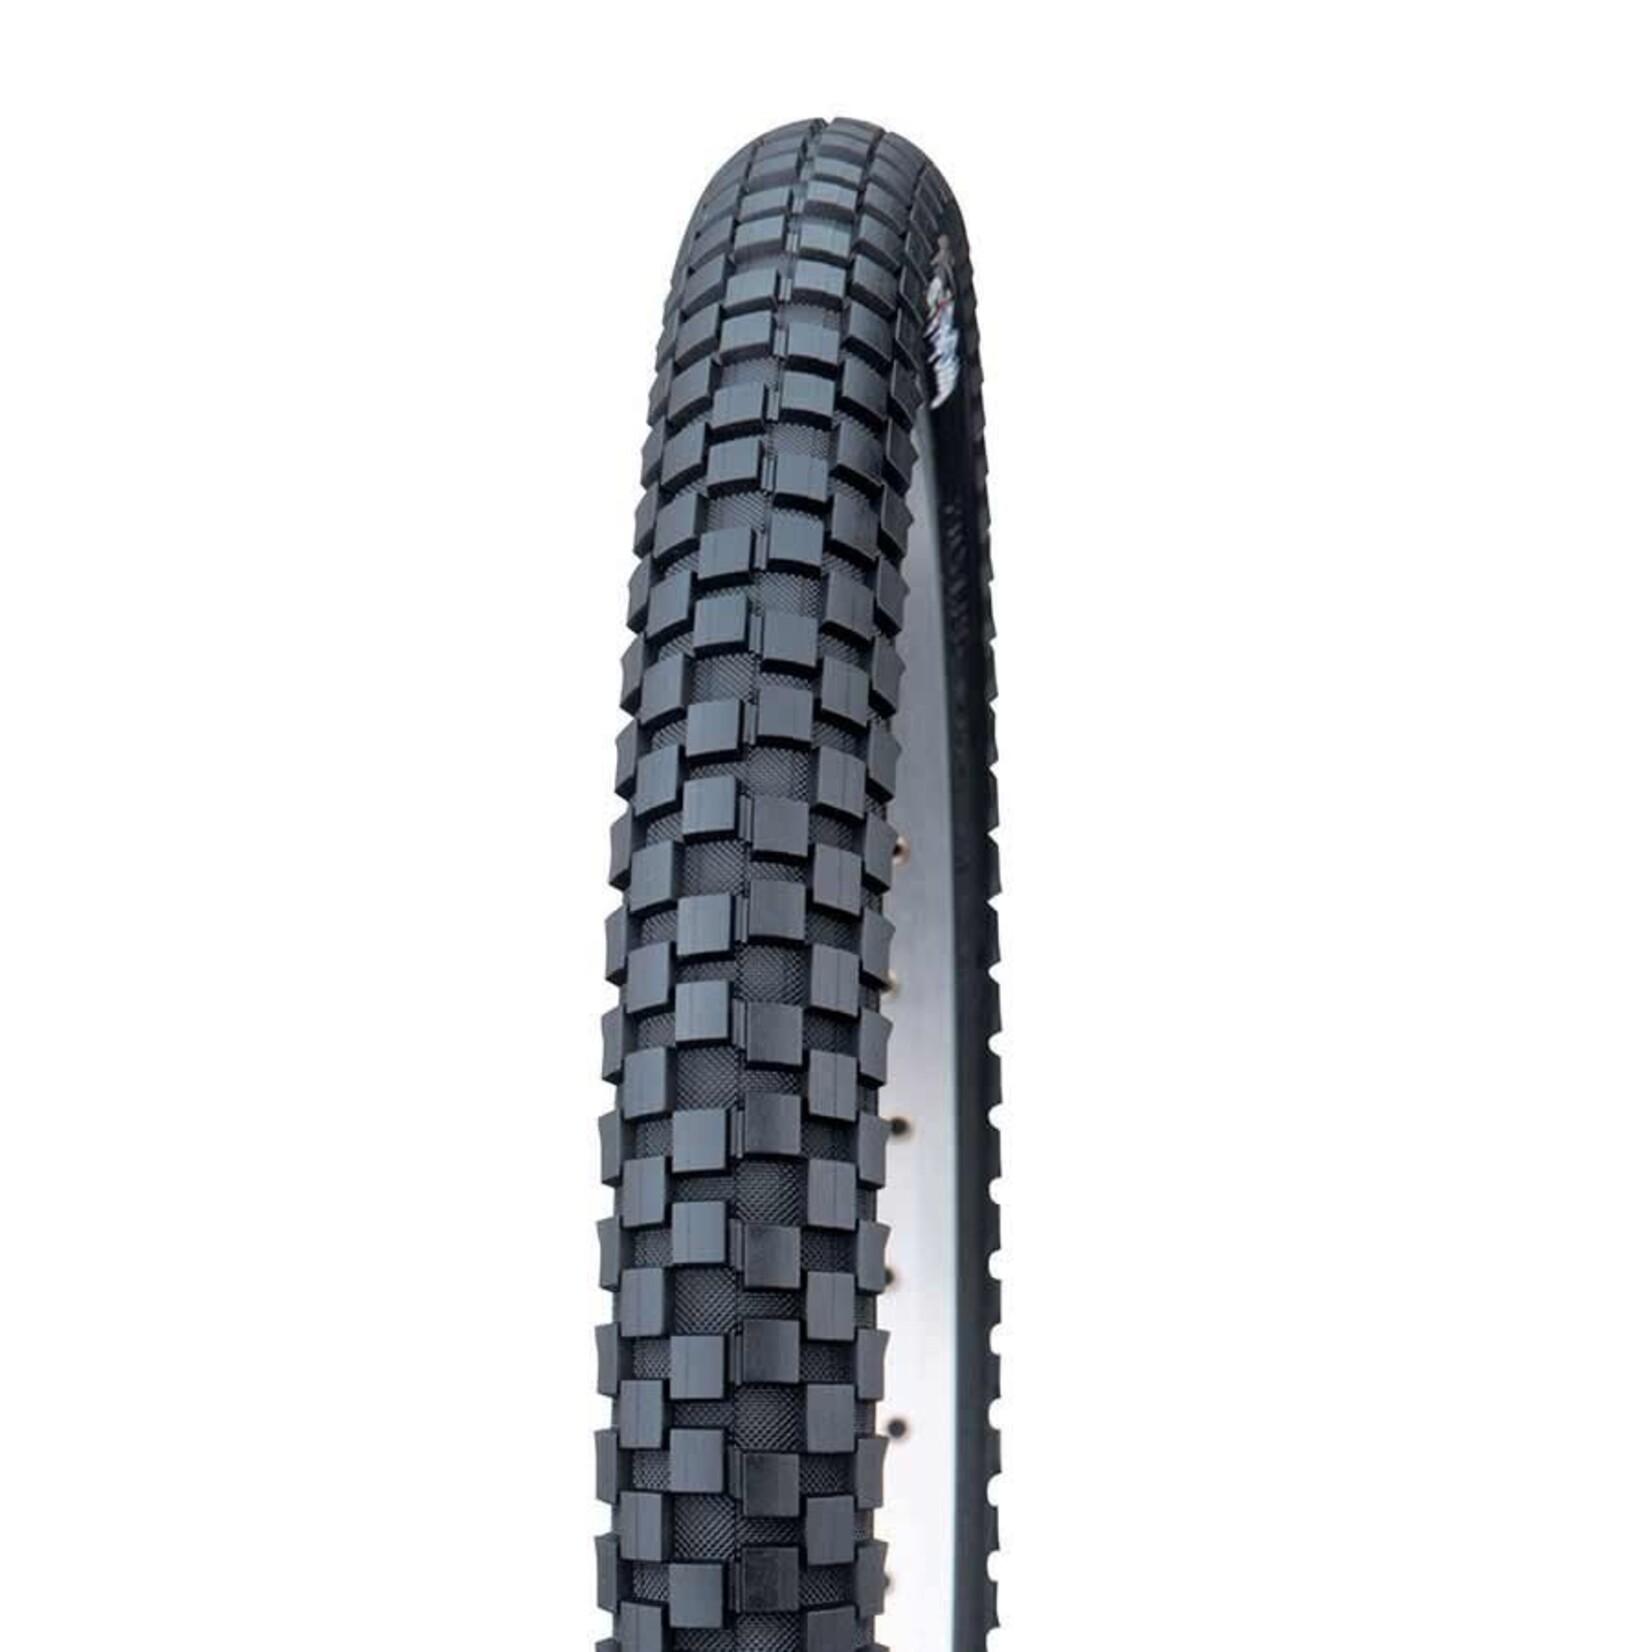 Maxxis Maxxis, BMX Holy Roller, Tire, 20x2.2", Wire, 60TPI, SC Black